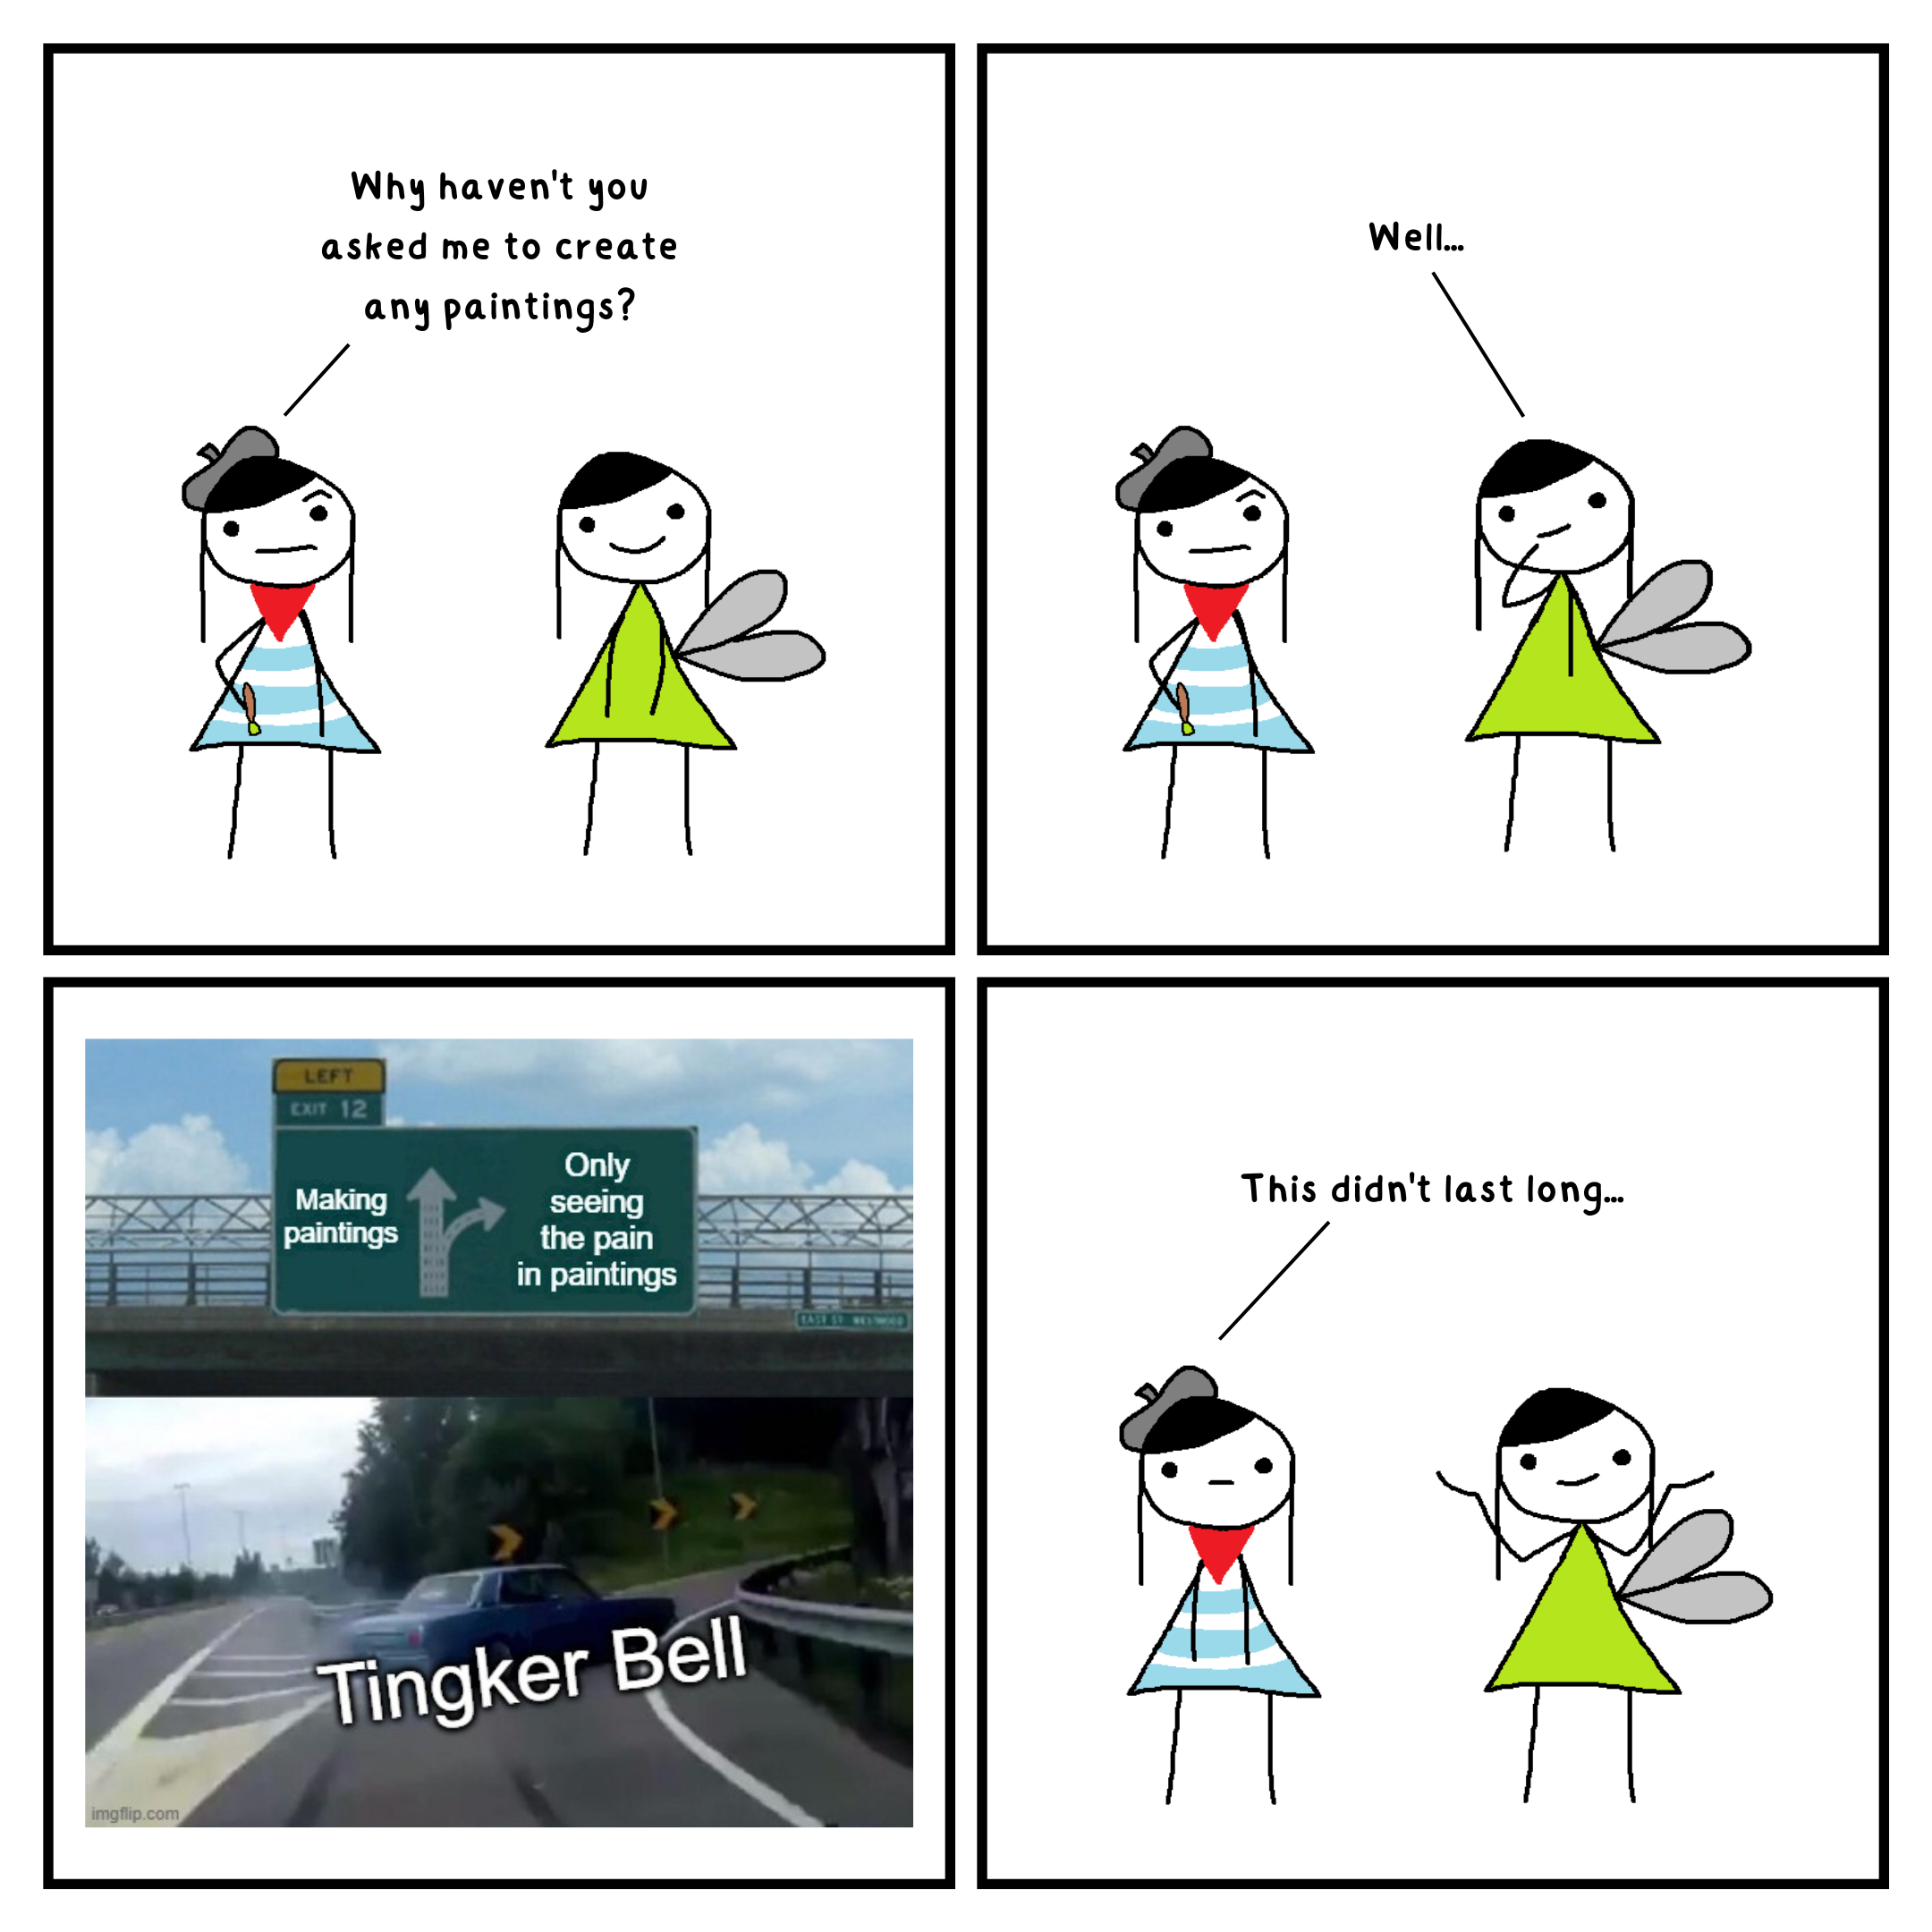 4 panel comic. In the top left panel, Paint Ting and Tingker Bell are standing. Paint Ting asks, 'Why haven't you asked me to create any paintings?'. In the top right panel, Tingker Bell thinks and replies, 'Well...'. In the bottom left panel, a car drifting right with a sign above. The direction ahead says 'Making paints' and the direction right says 'Only seeing the pain in paintings'. In the bottom right panel, Paint Ting stands with a neutral expression and says 'This didn't last long...'.